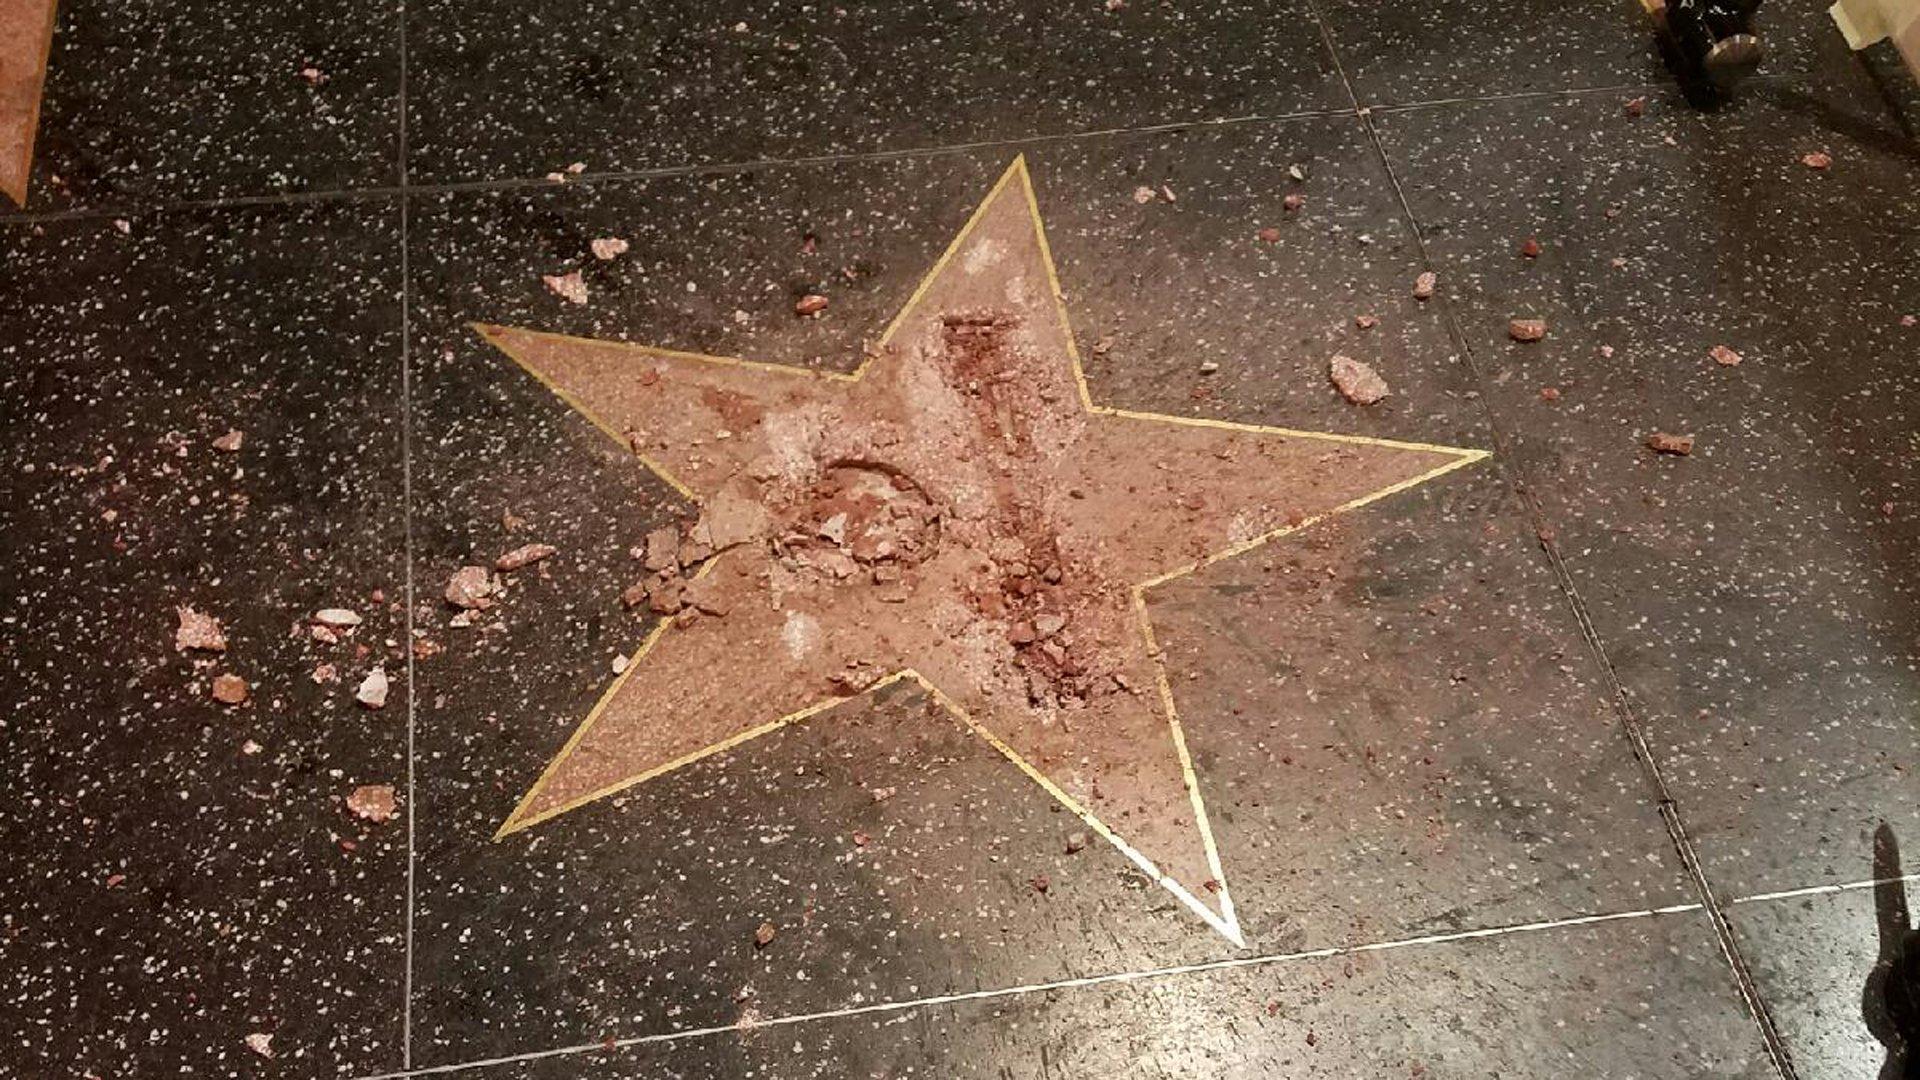 Donald Trump's Star Vandalized Again on Hollywood Walk of Fame